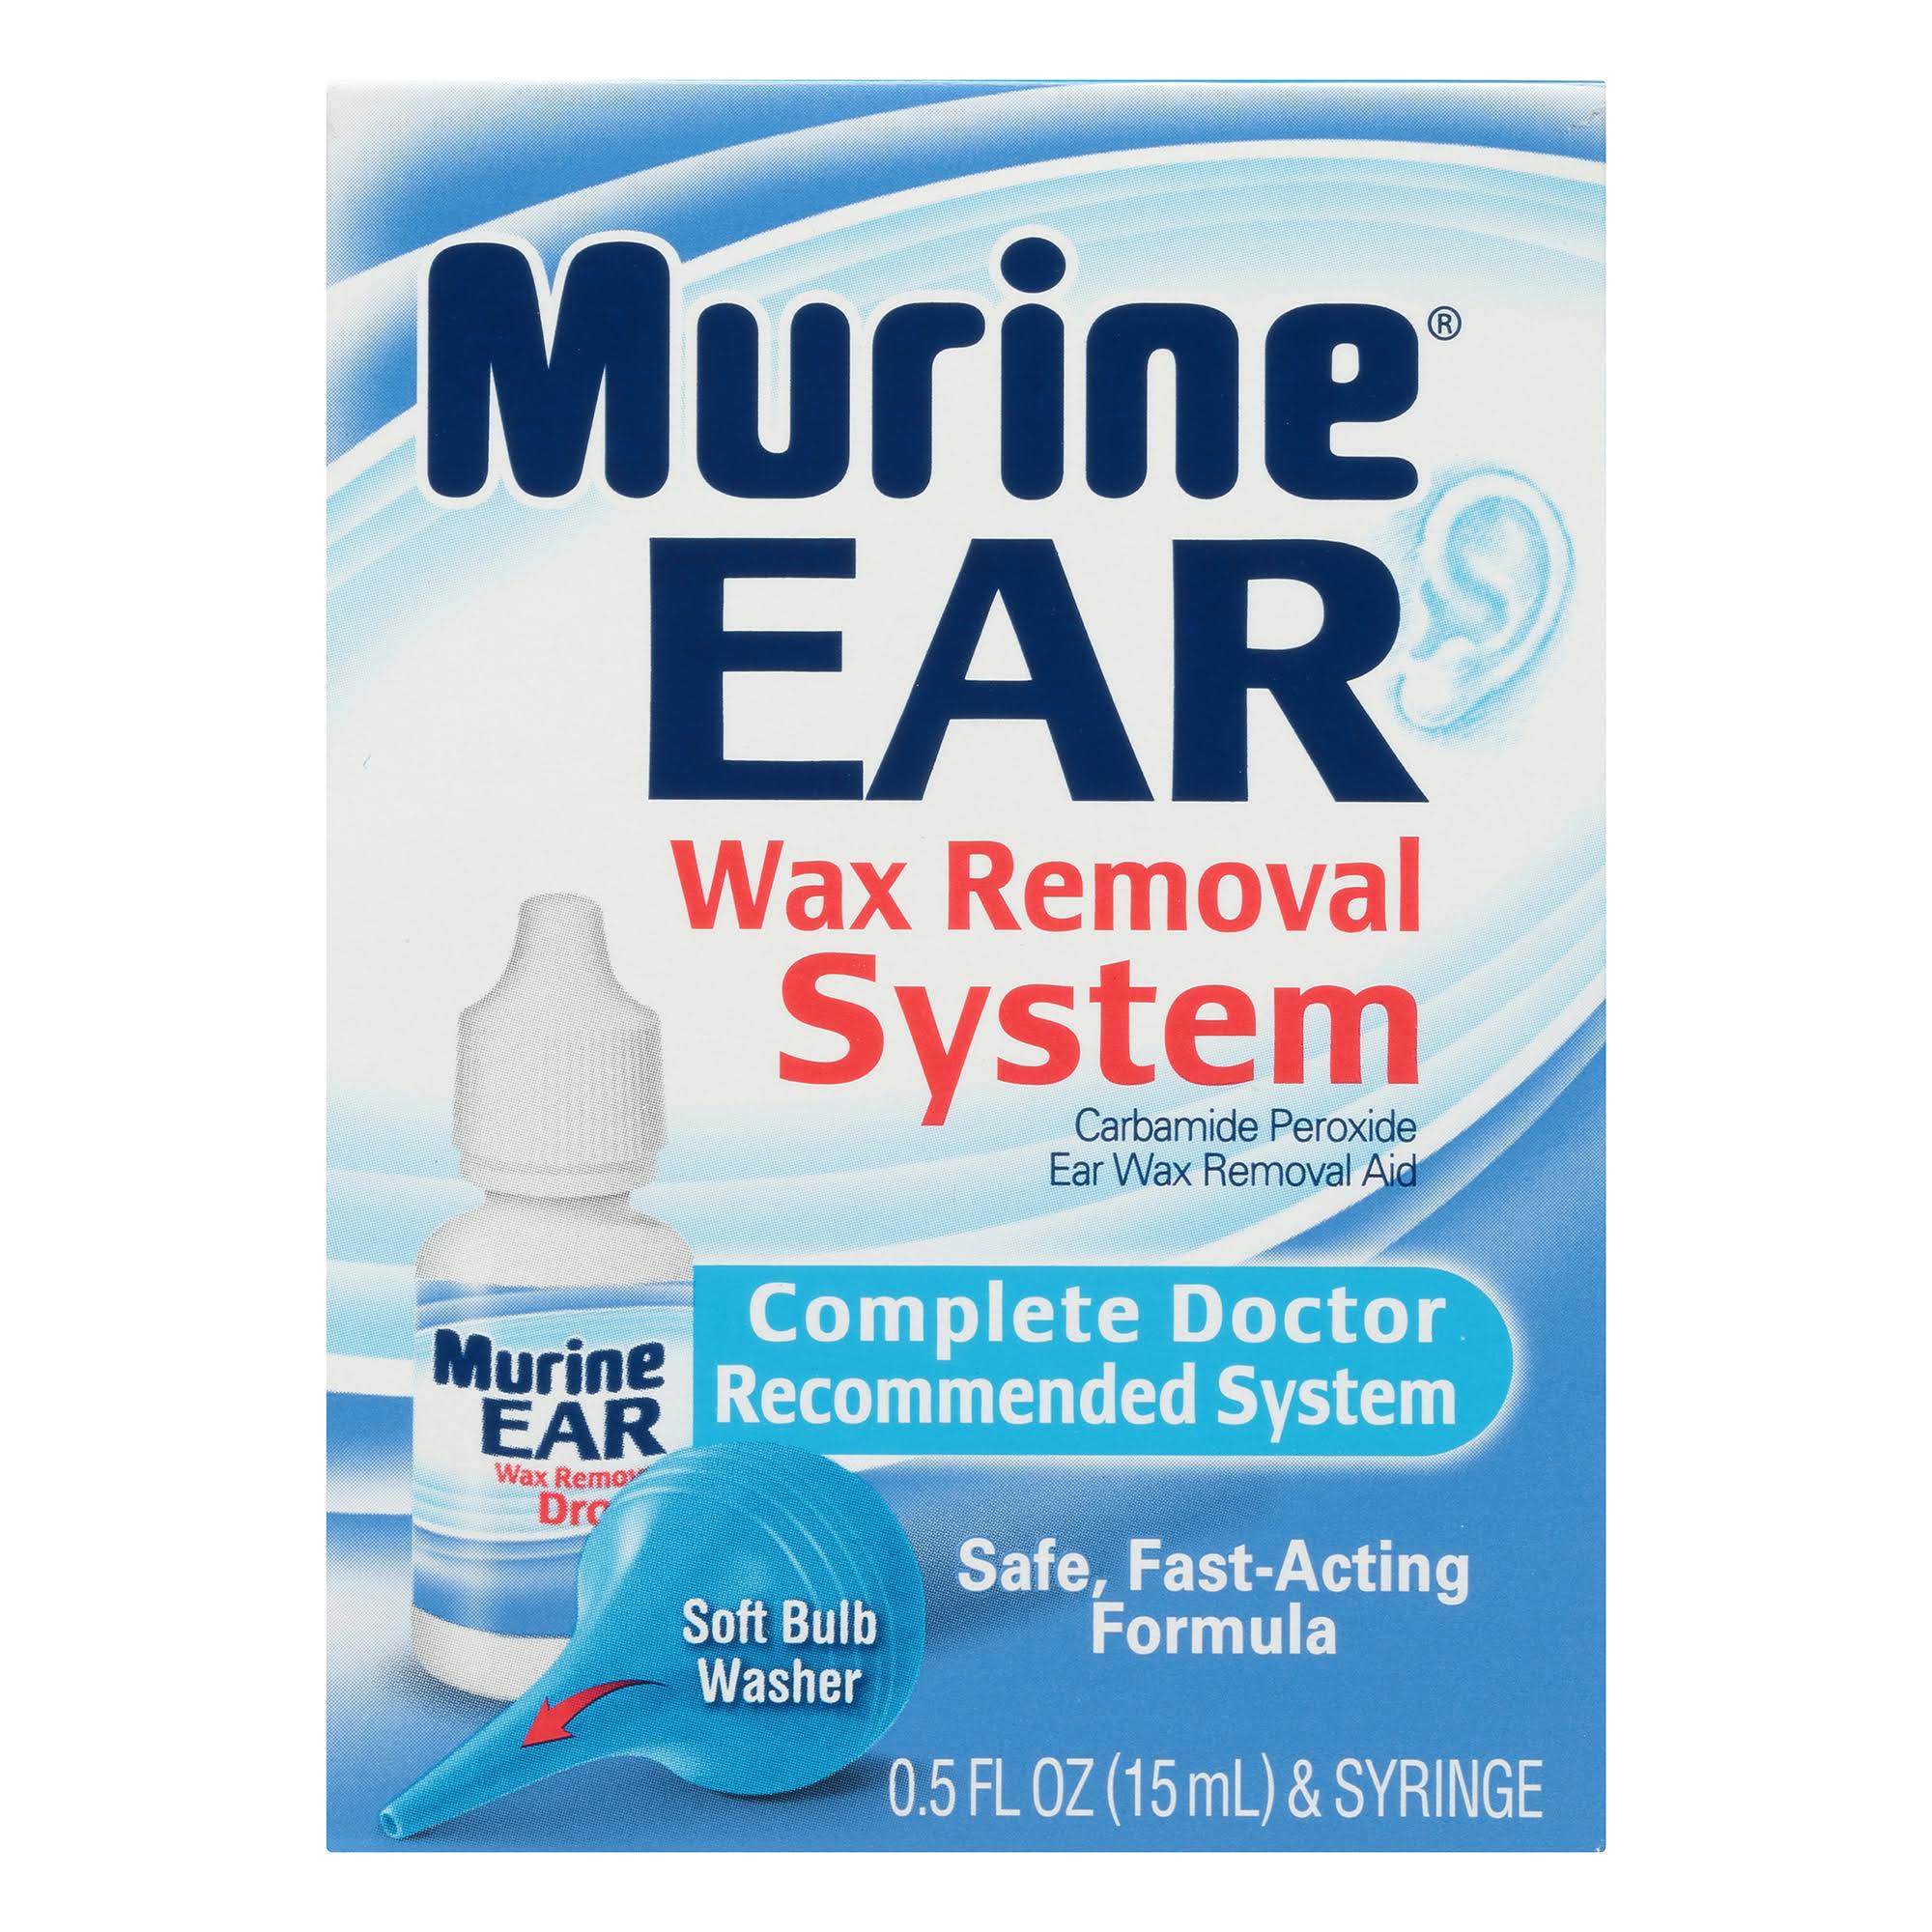 Murine Ear Wax Removal System - Syringe and 15ml Wax Removal Aid